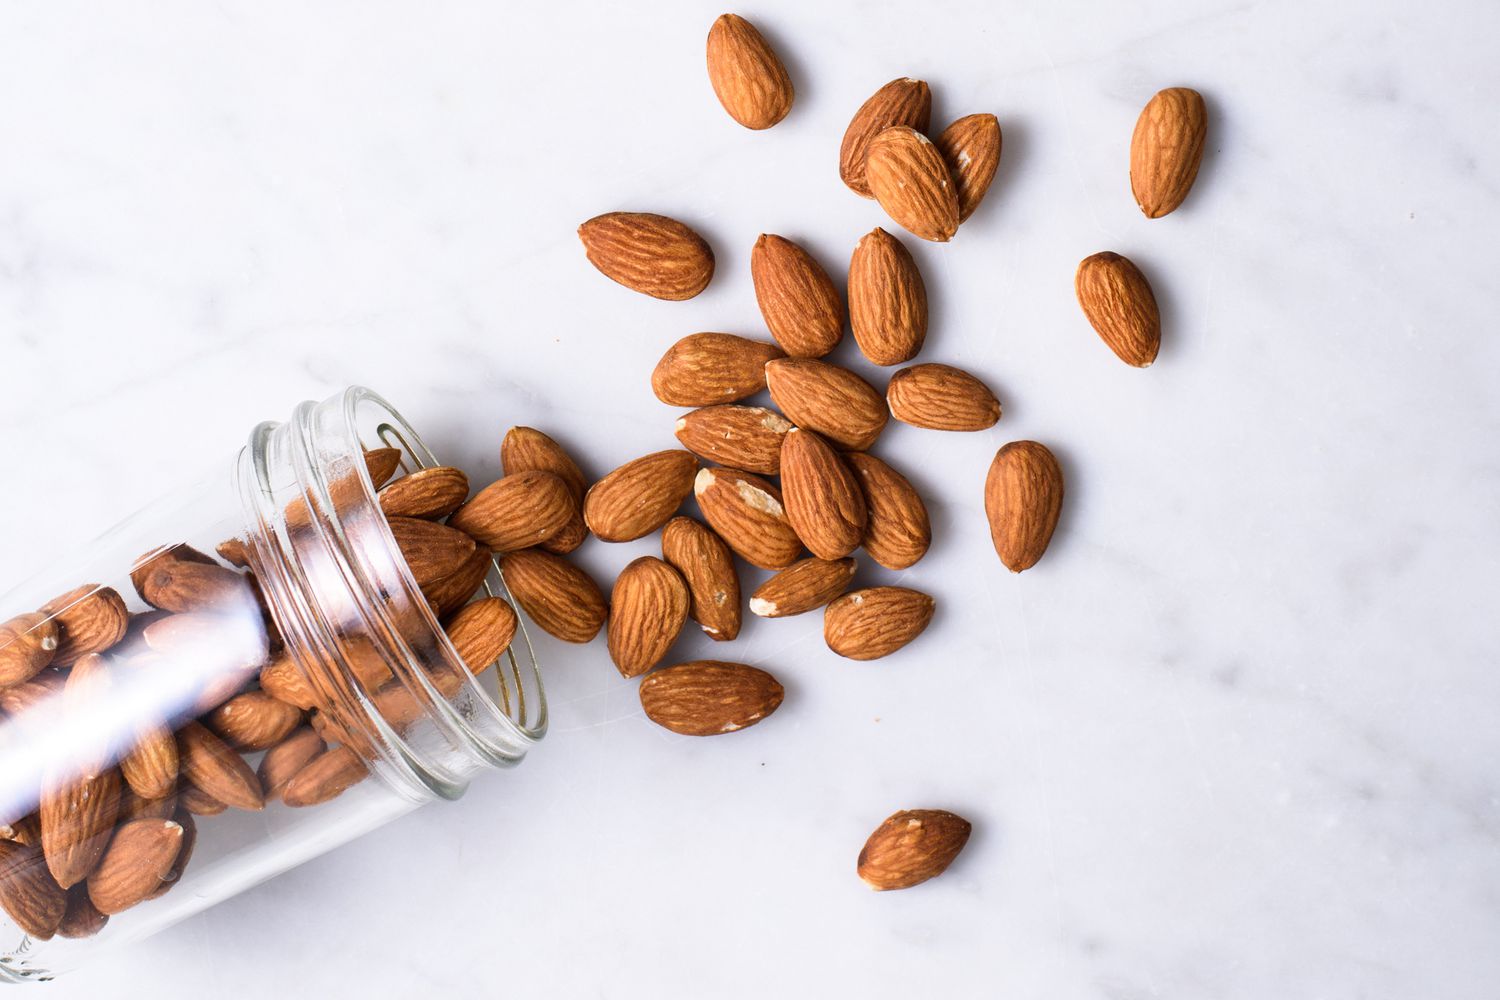 Buy Smoked Almonds Online- A New Way To Healthy Life